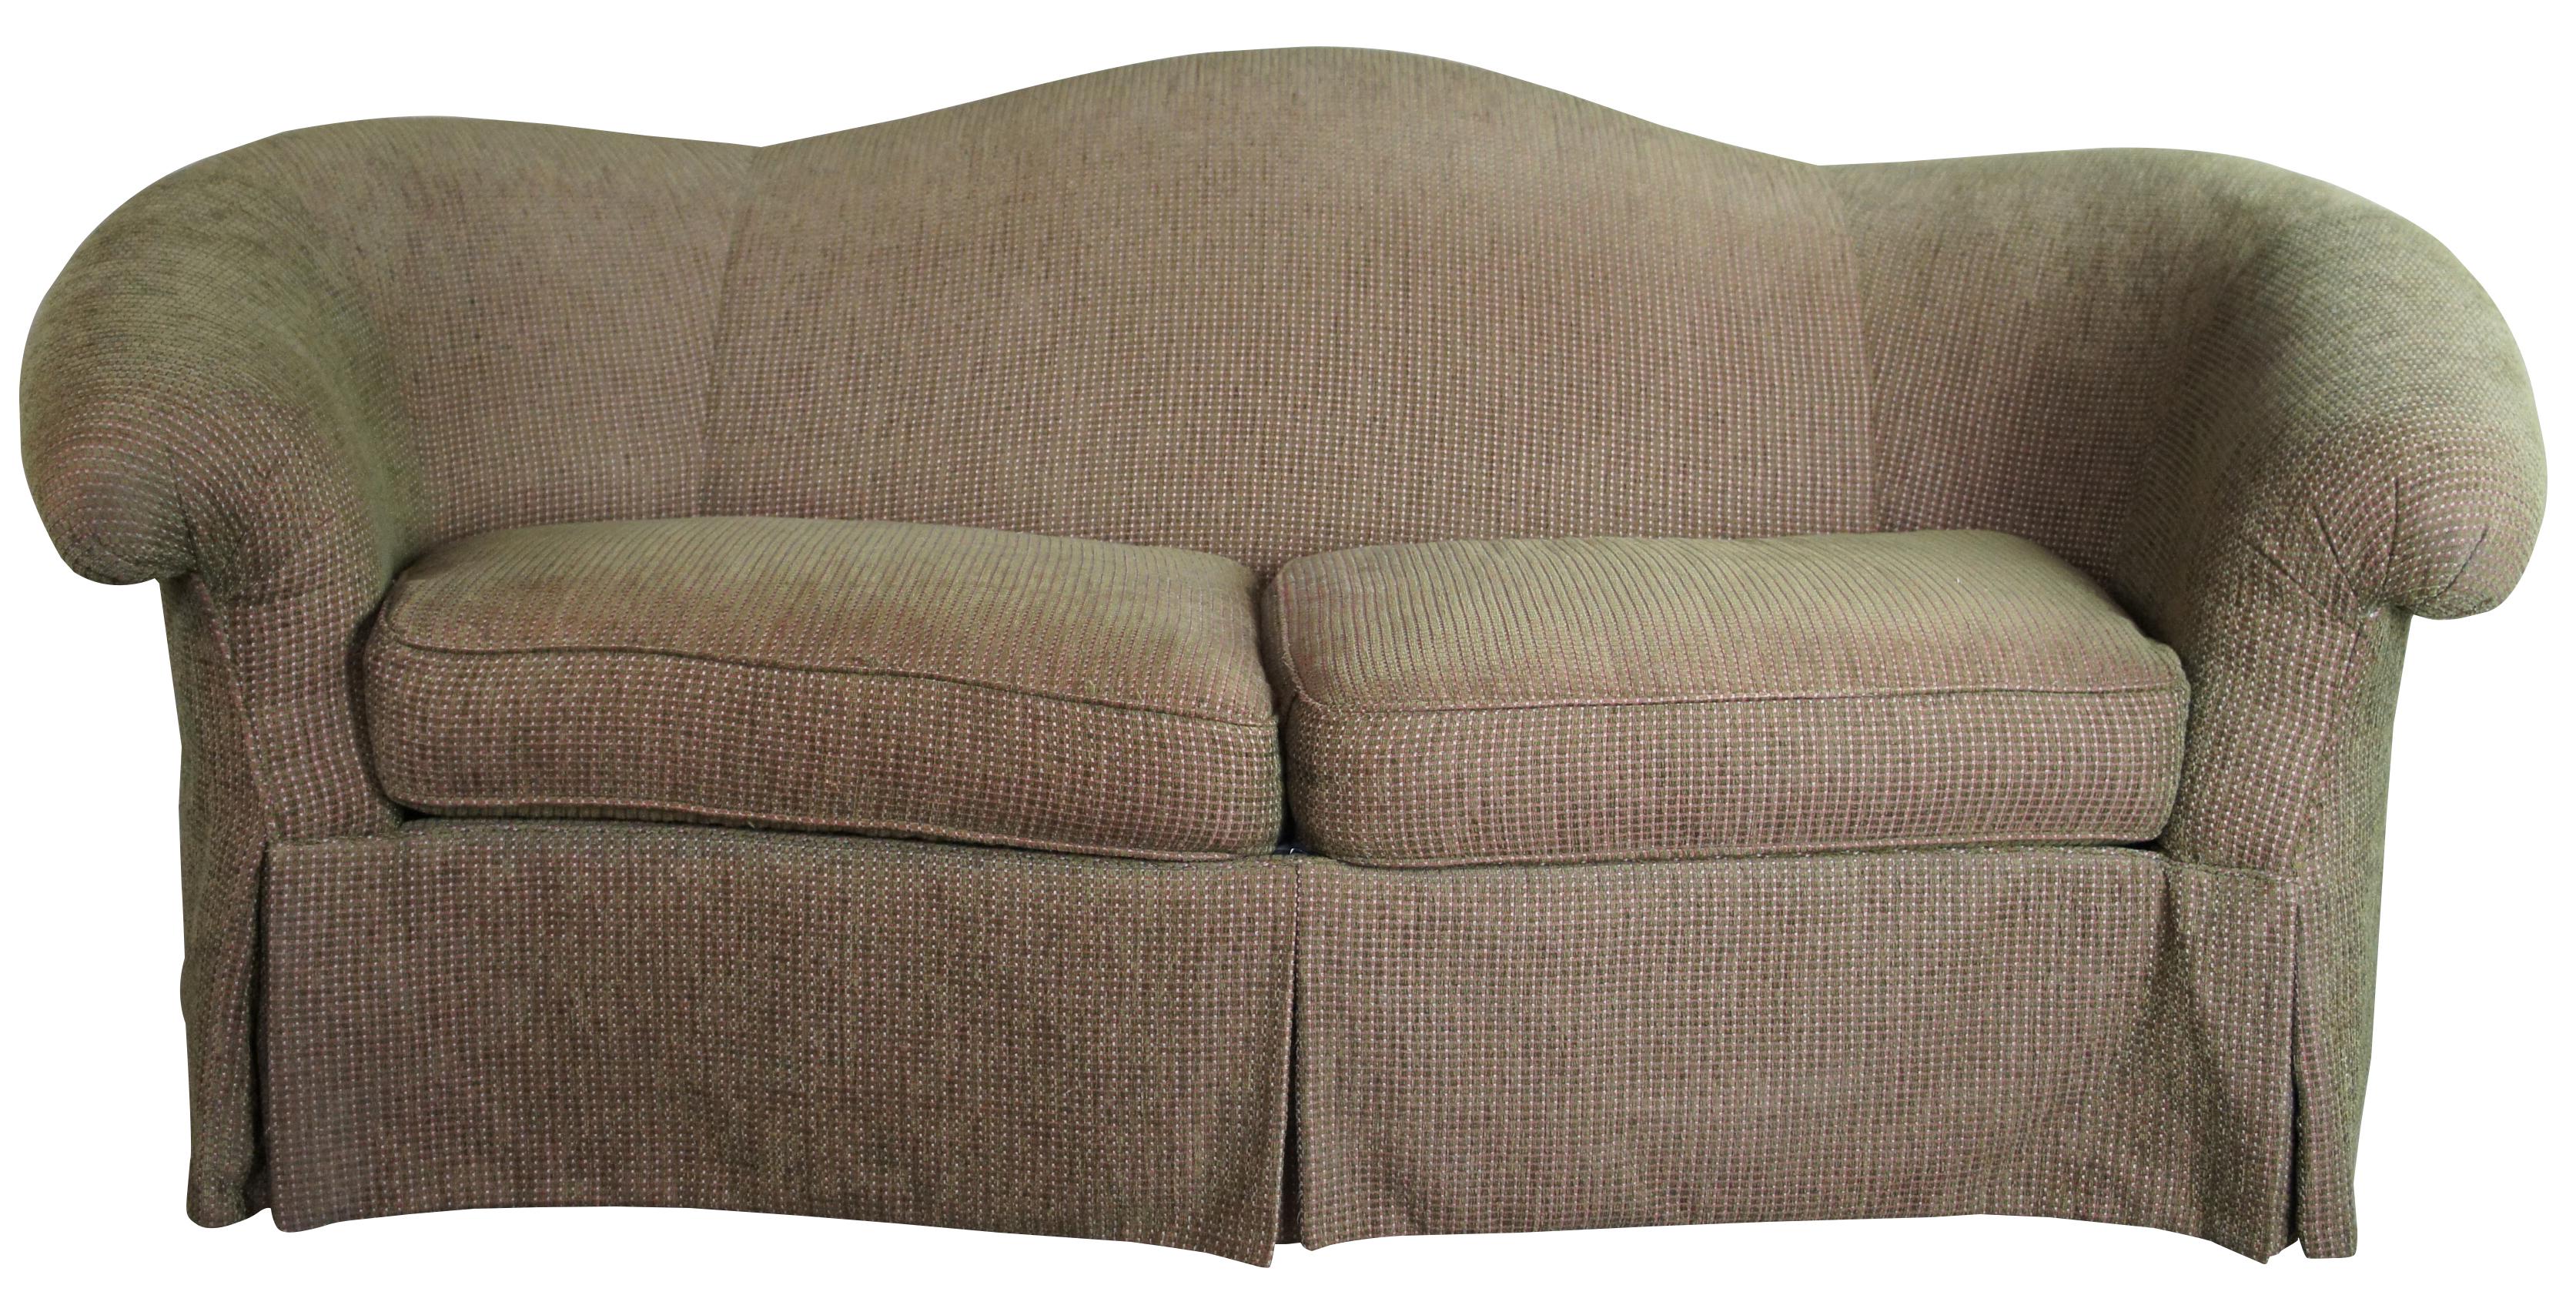 camel back sofa with rolled arms